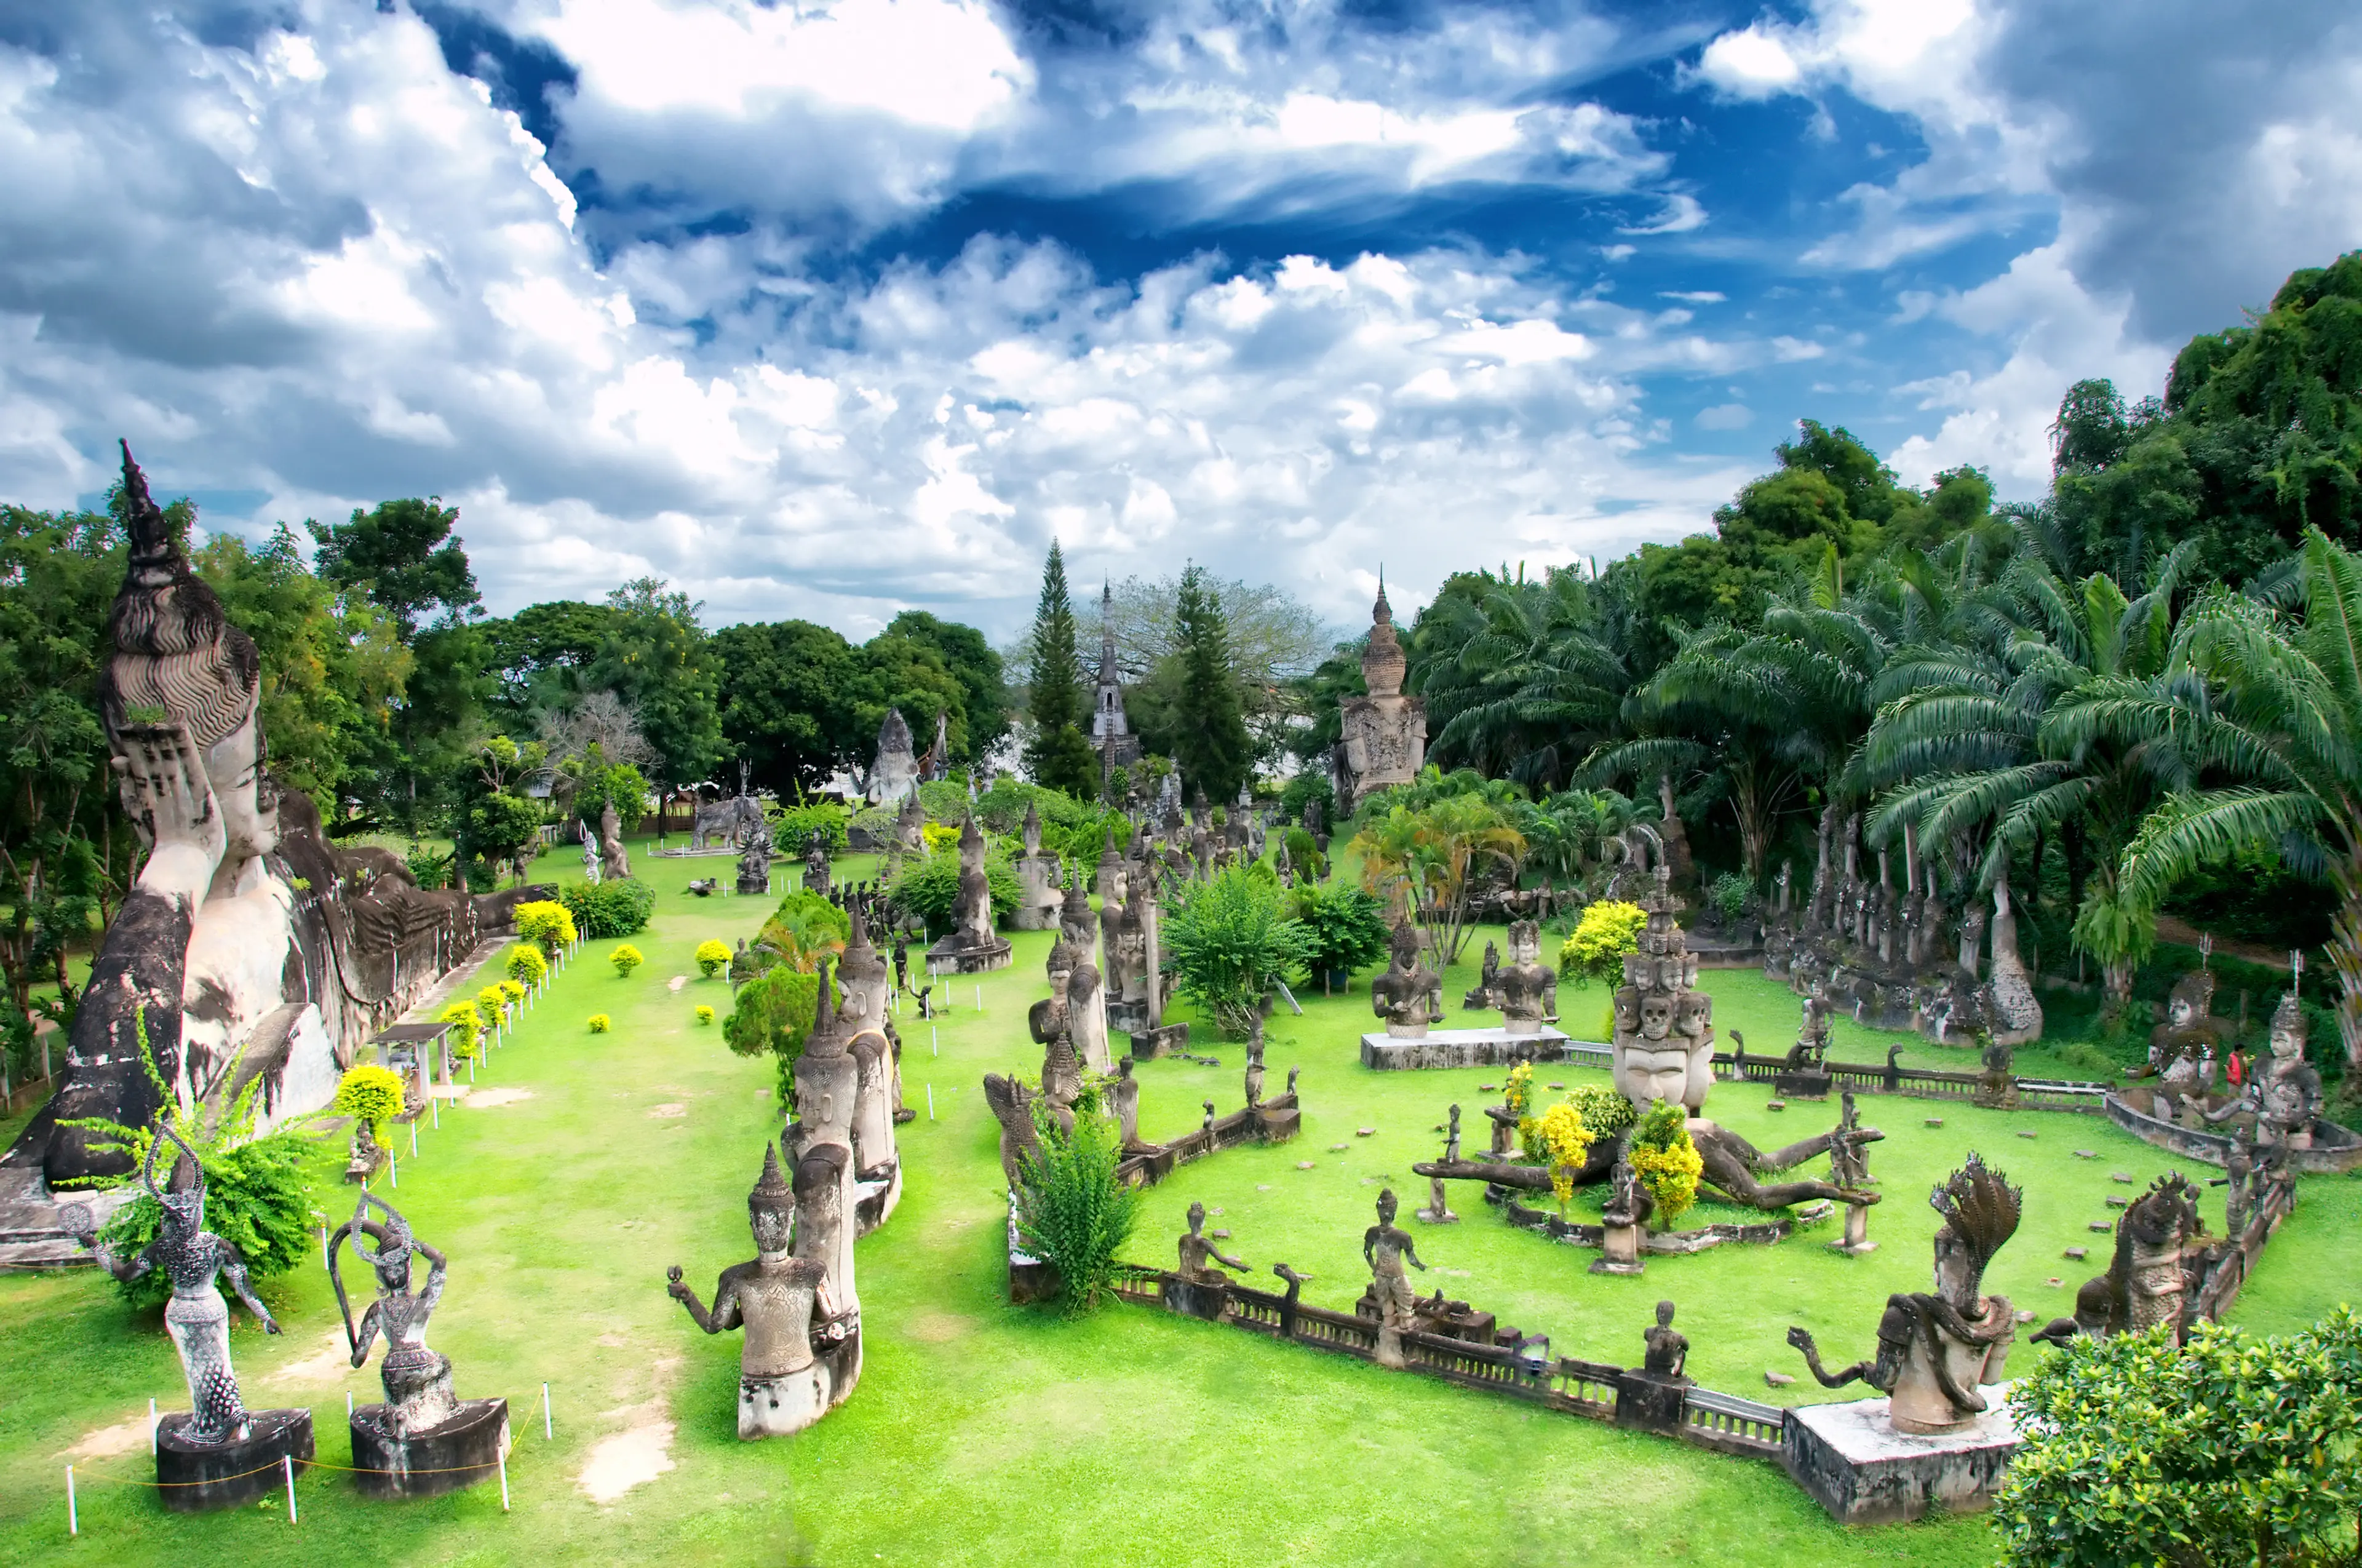 7-Day Local Adventure & Nightlife Experience in Laos with Friends